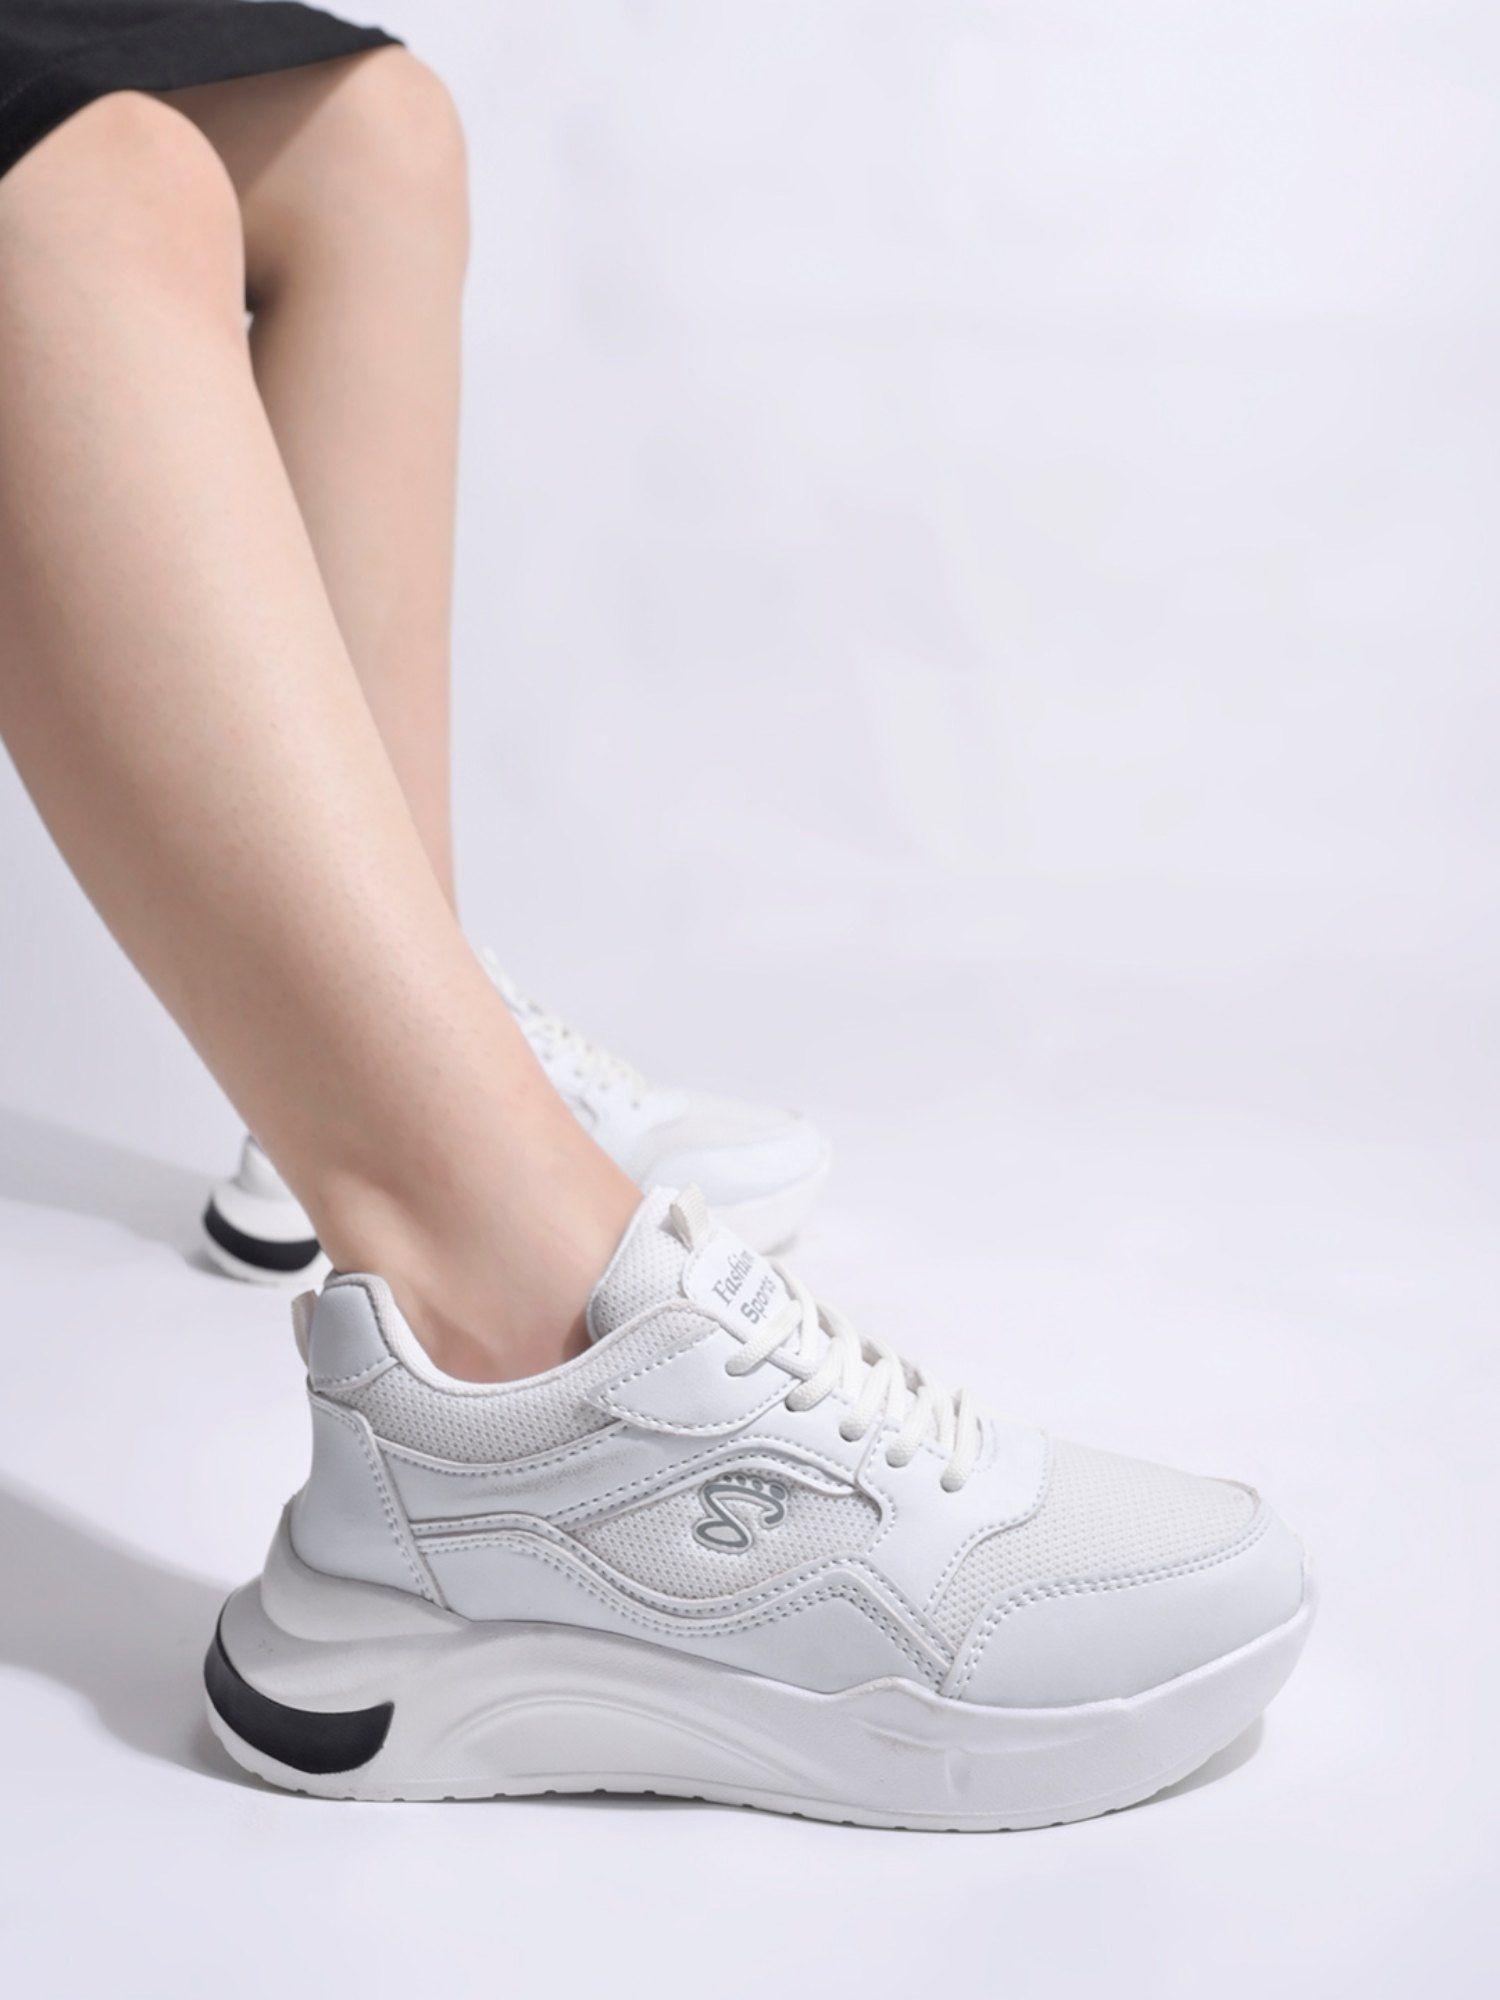 lace-up comfortable white sports shoes for girls